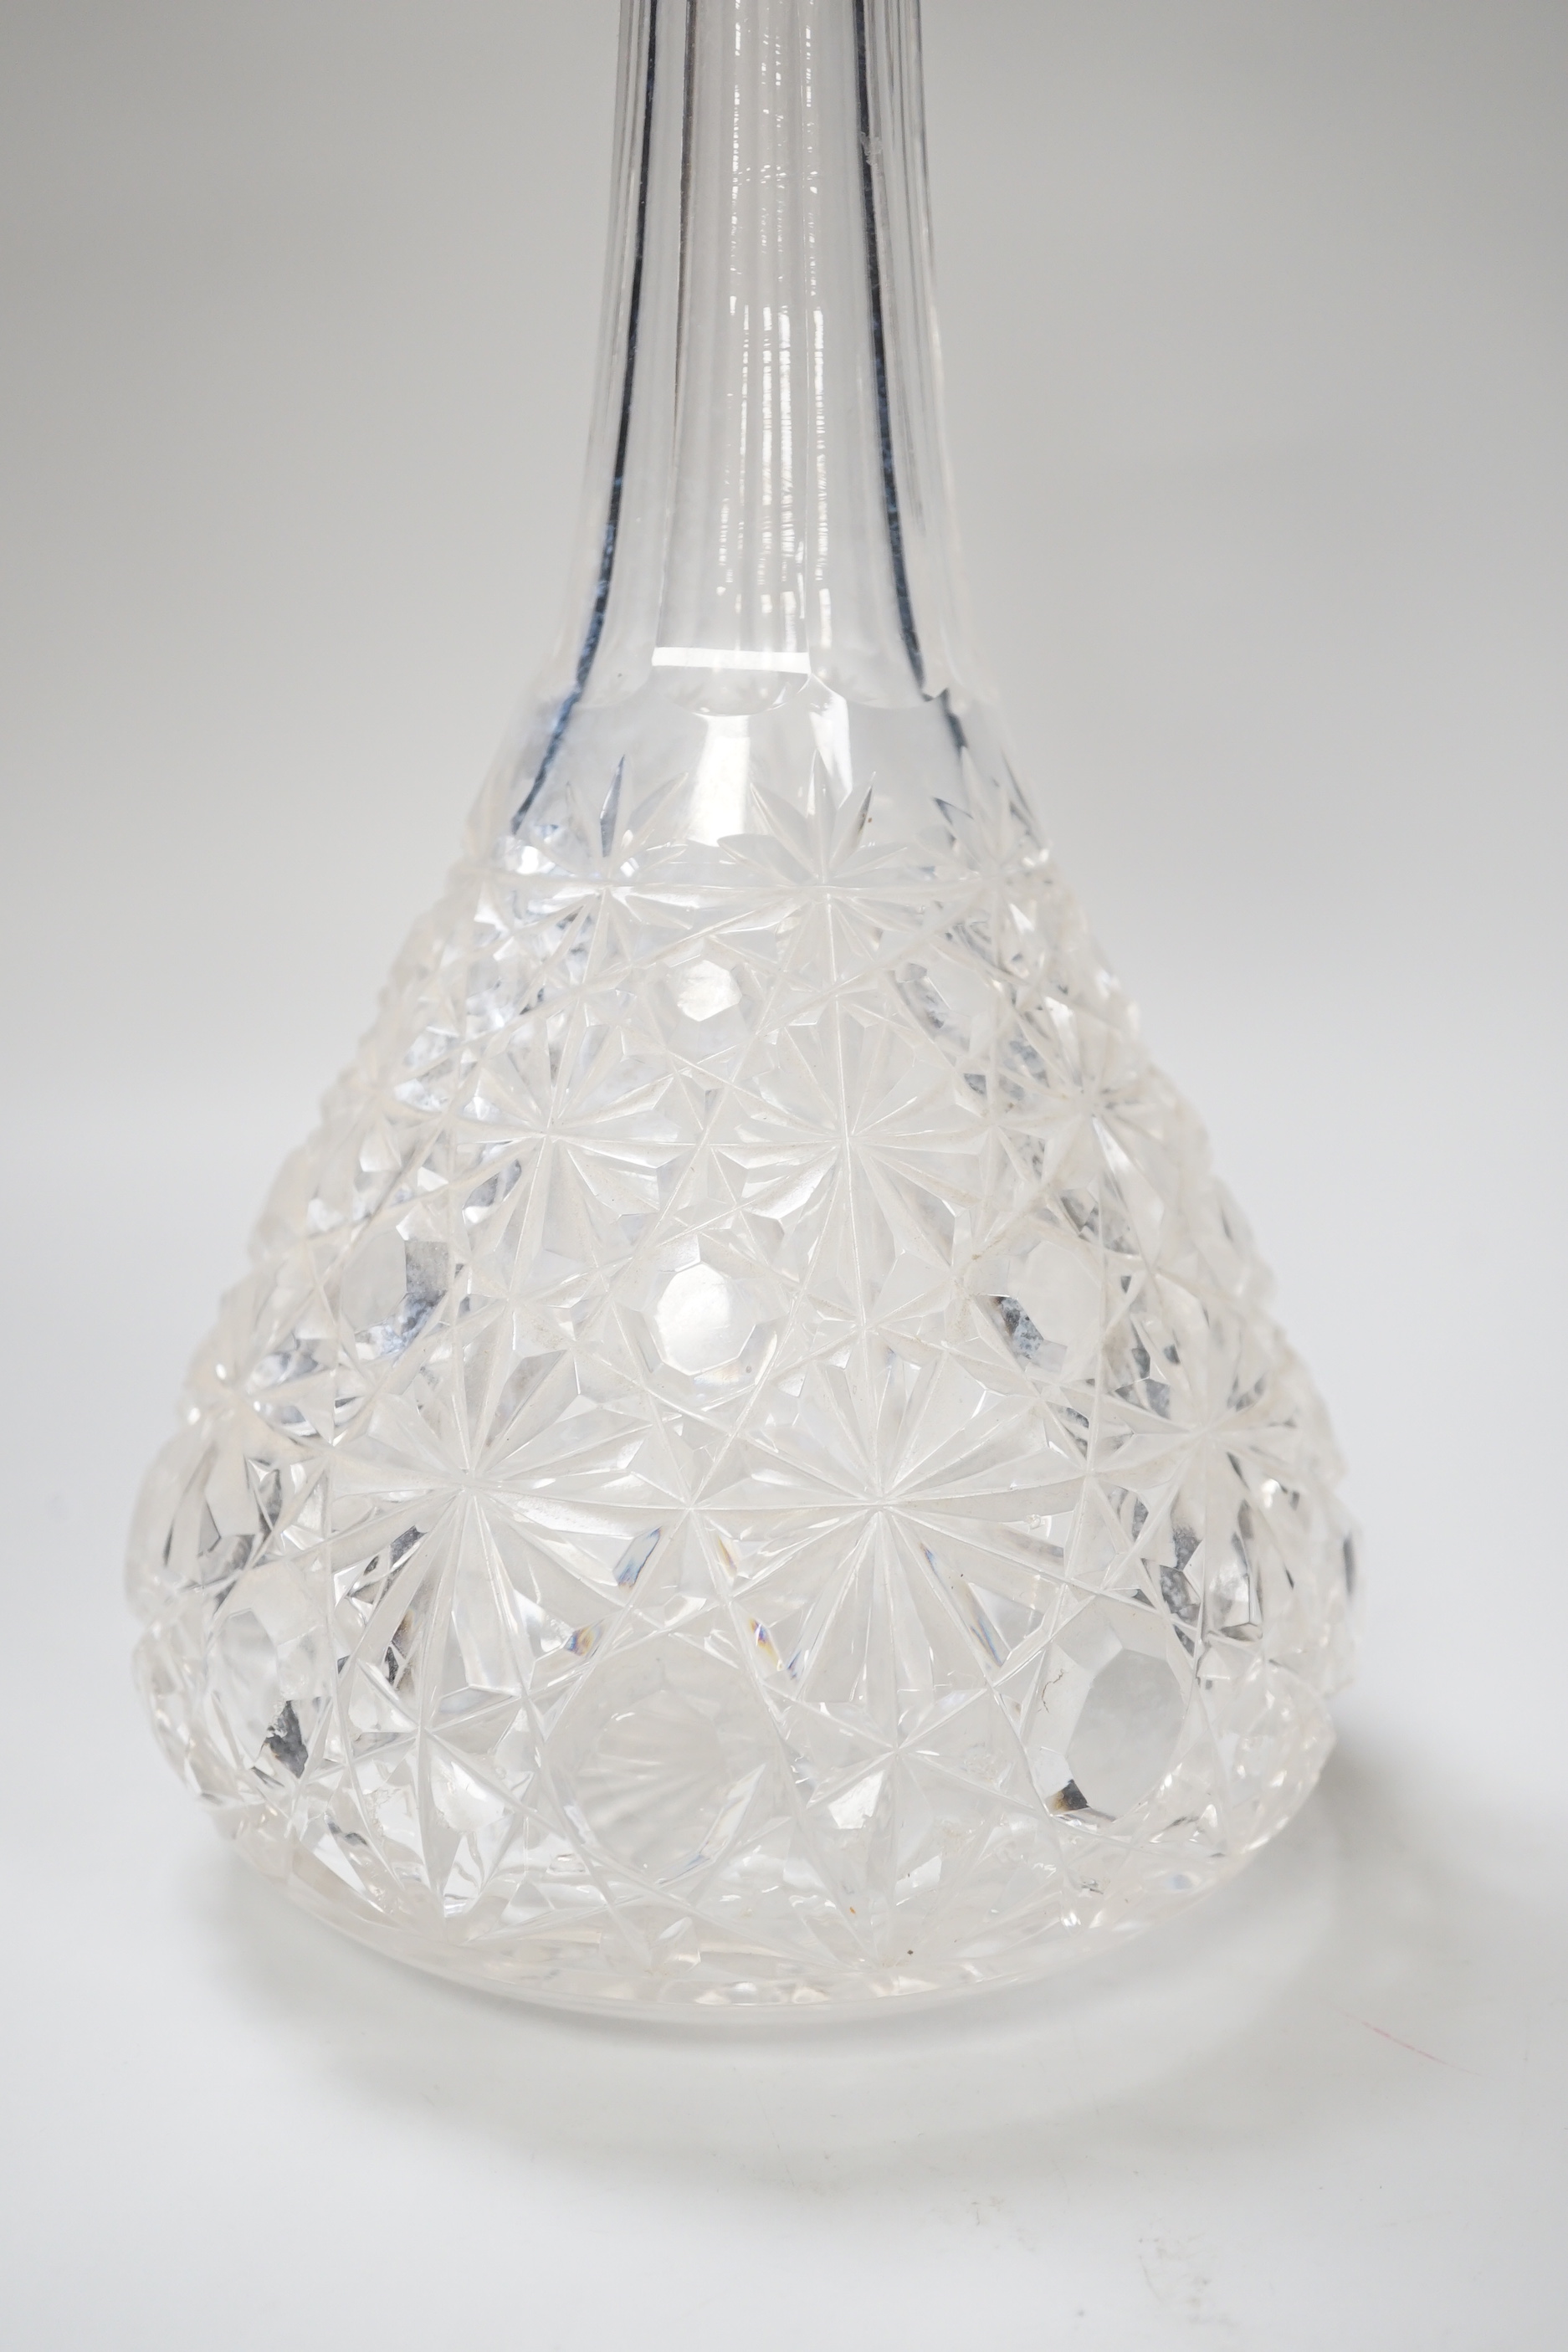 A George V silver collared cut glass decanter and stopper, London 1926, 37cm tall